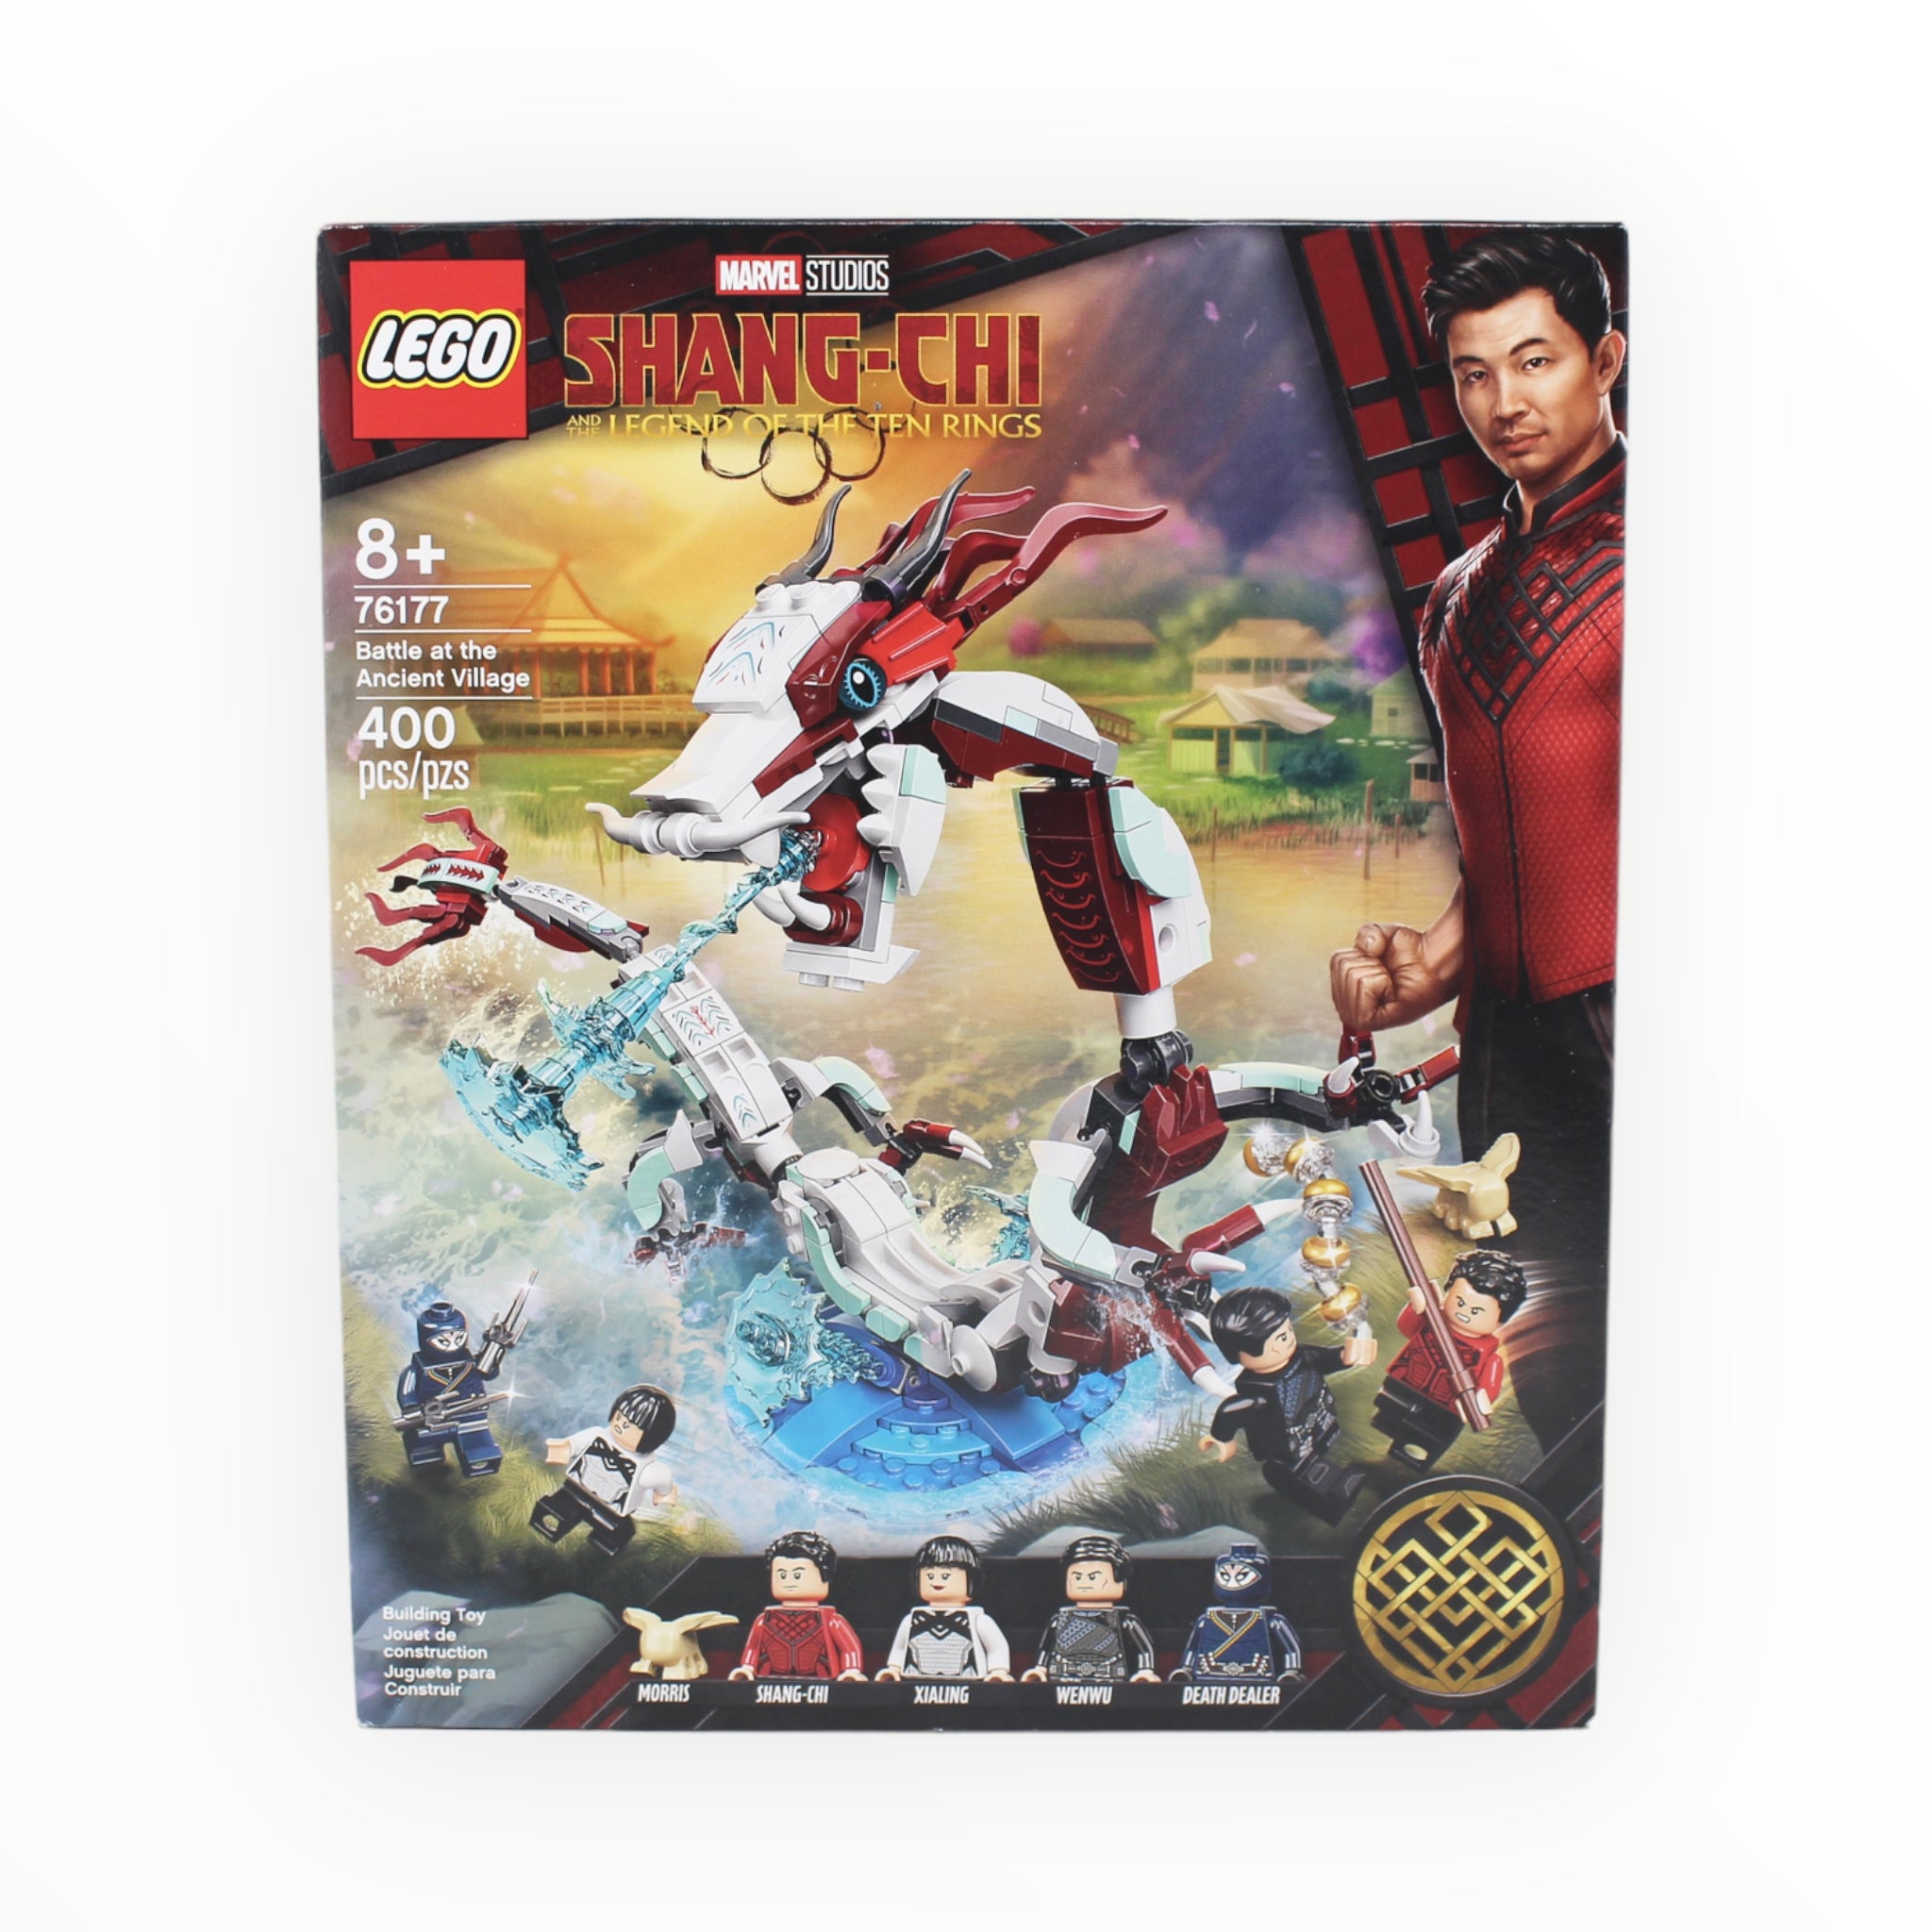 Retired Set 76177 Shang-Chi Battle at the Ancient Village